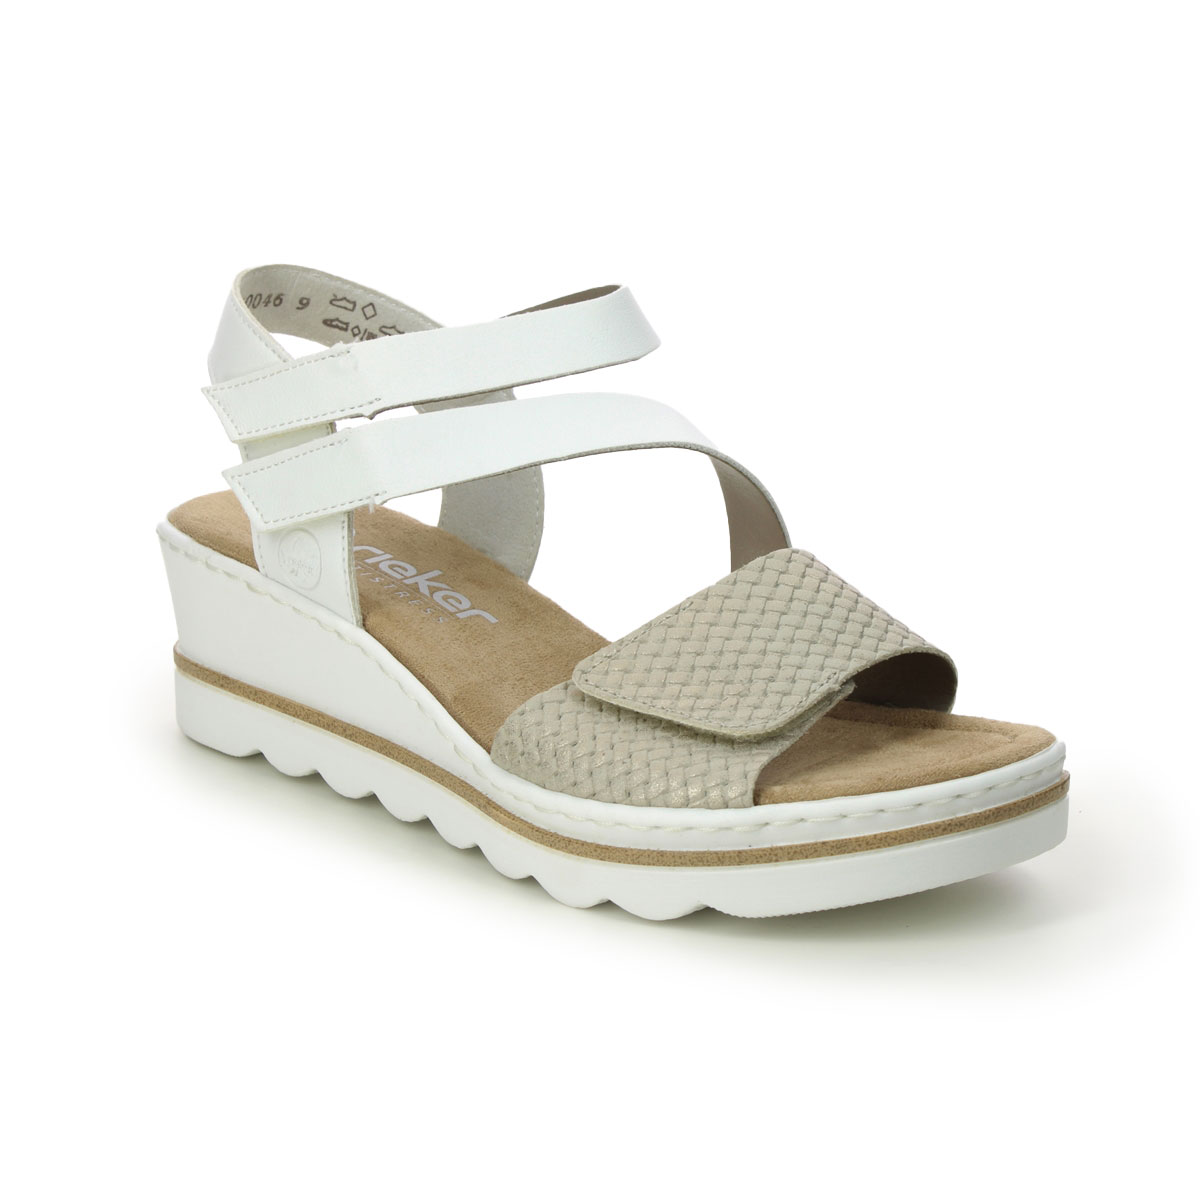 Rieker 67454-80 White Light Gold Womens Wedge Sandals in a Plain Man-made in Size 39